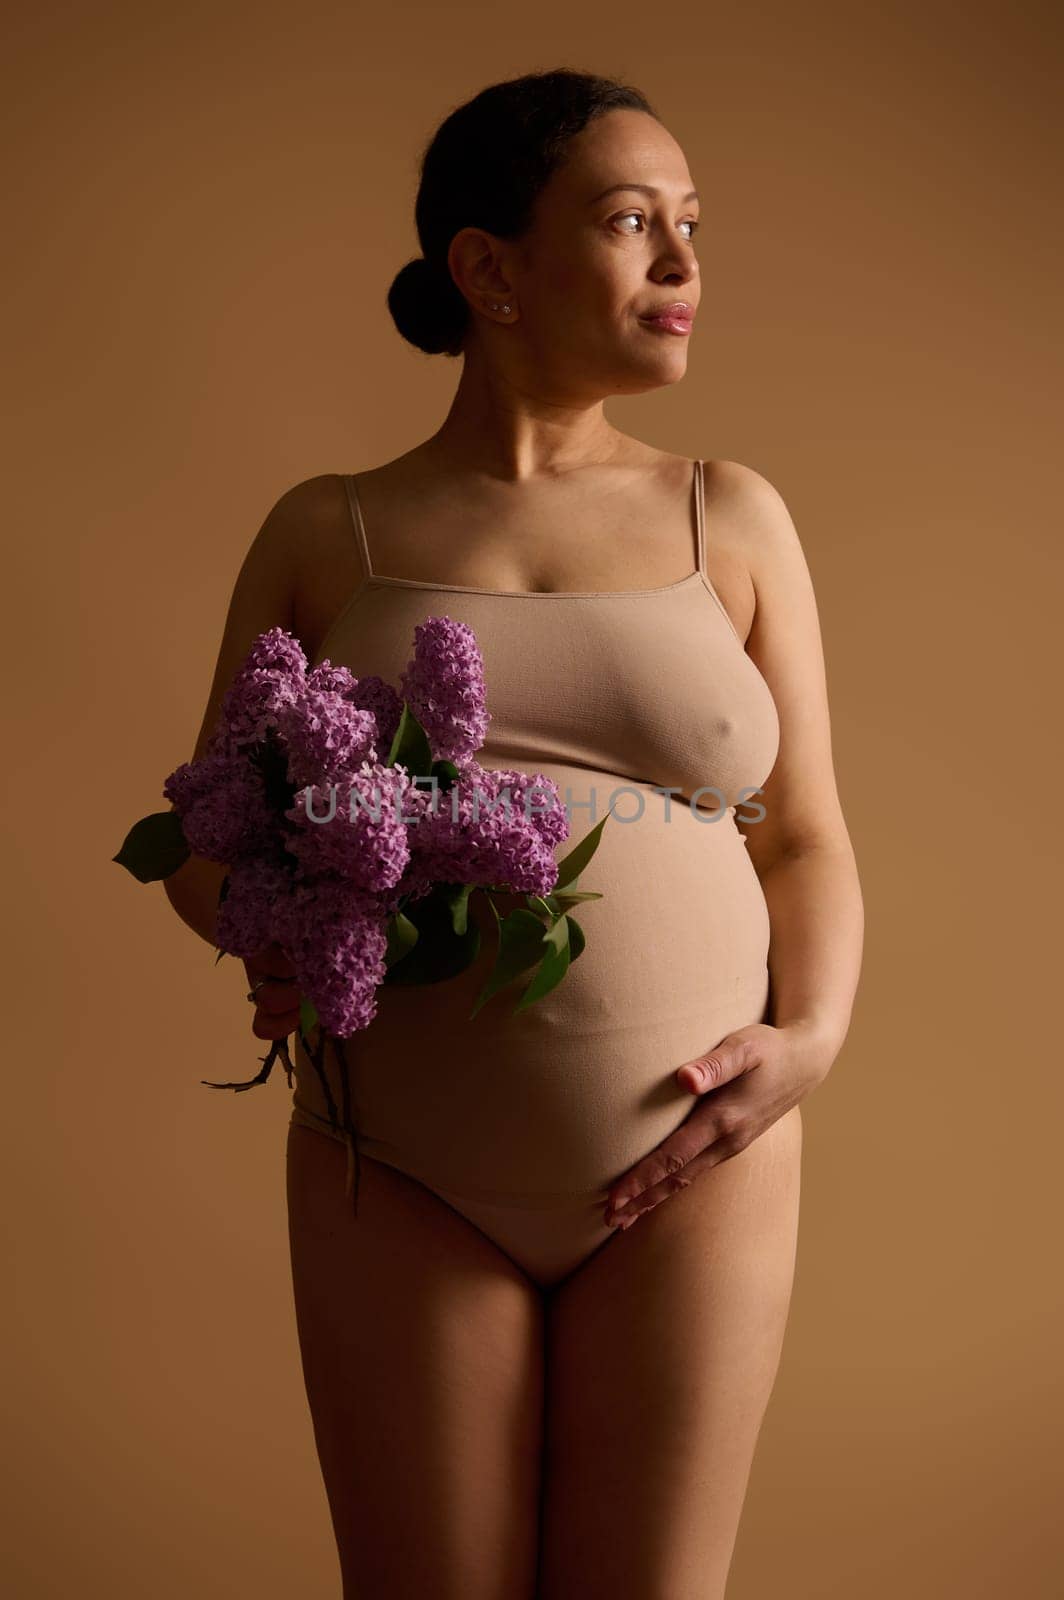 Beautiful pregnant woman expecting baby, holding belly, looking aside, posing in lingerie with a bunch of purple lilacs by artgf